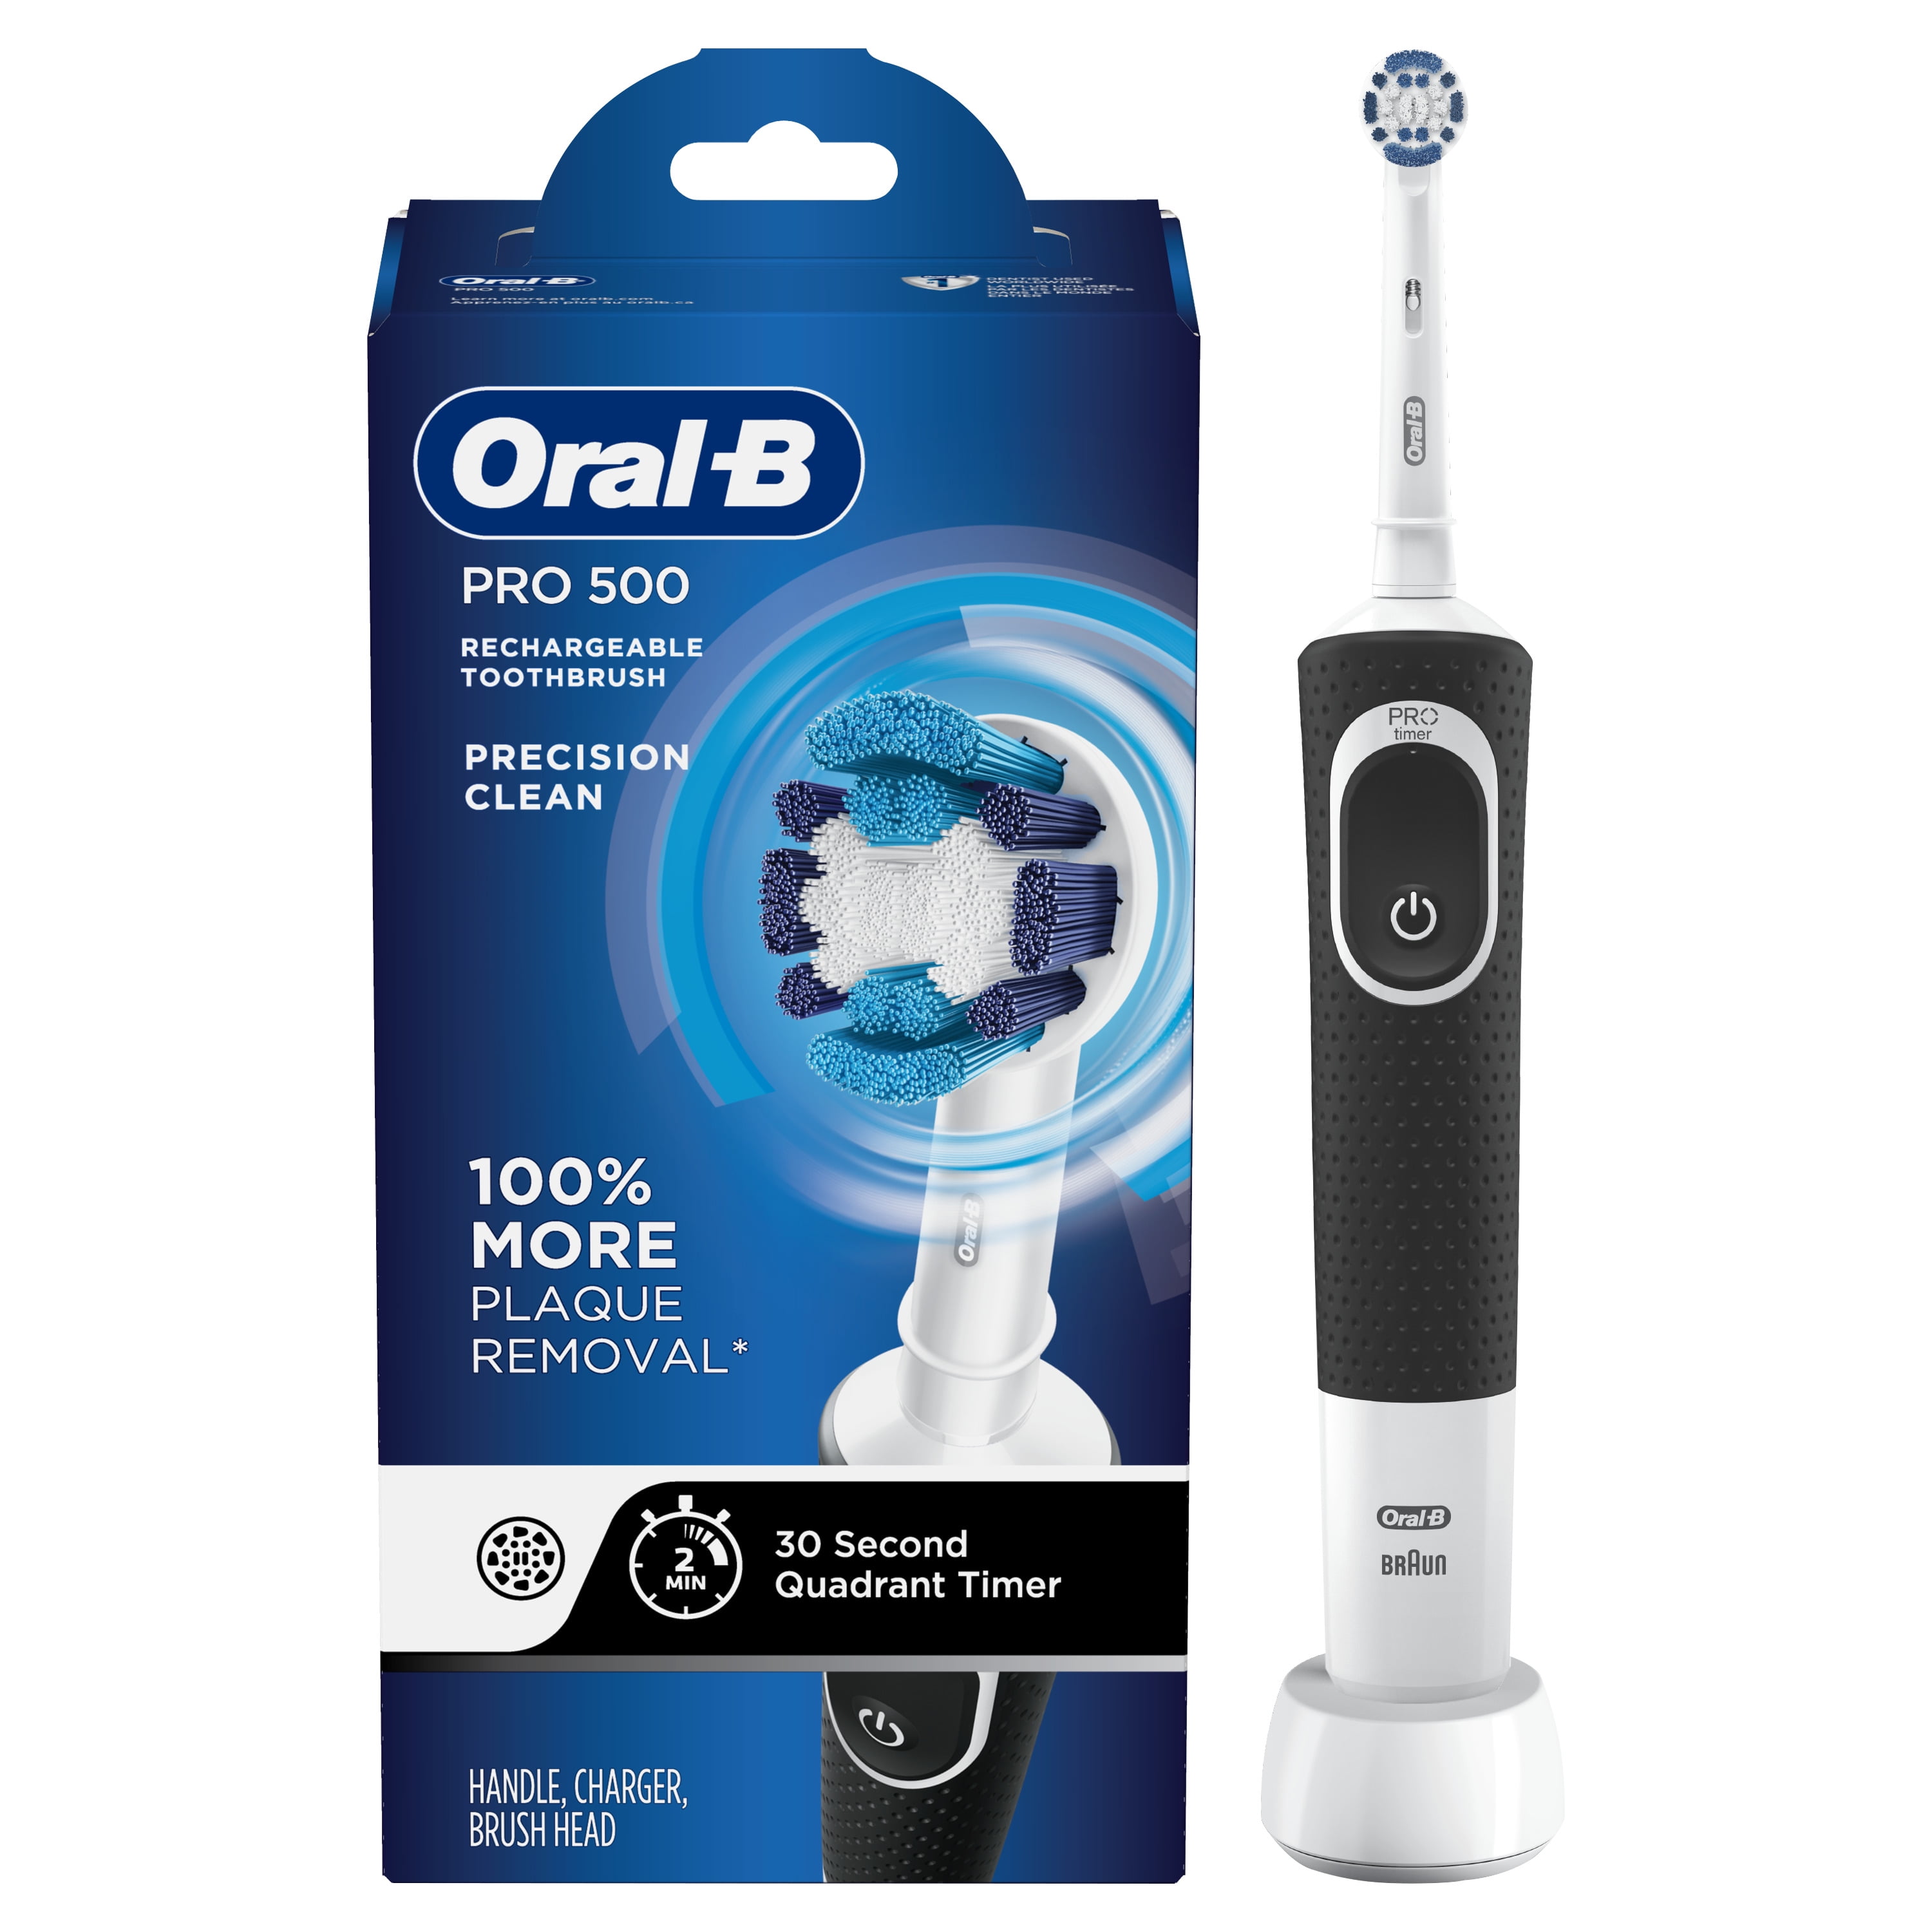 Oral B Pro 500 Precision Clean Rechargeable Electric Toothbrush Walmartcom Walmartcom